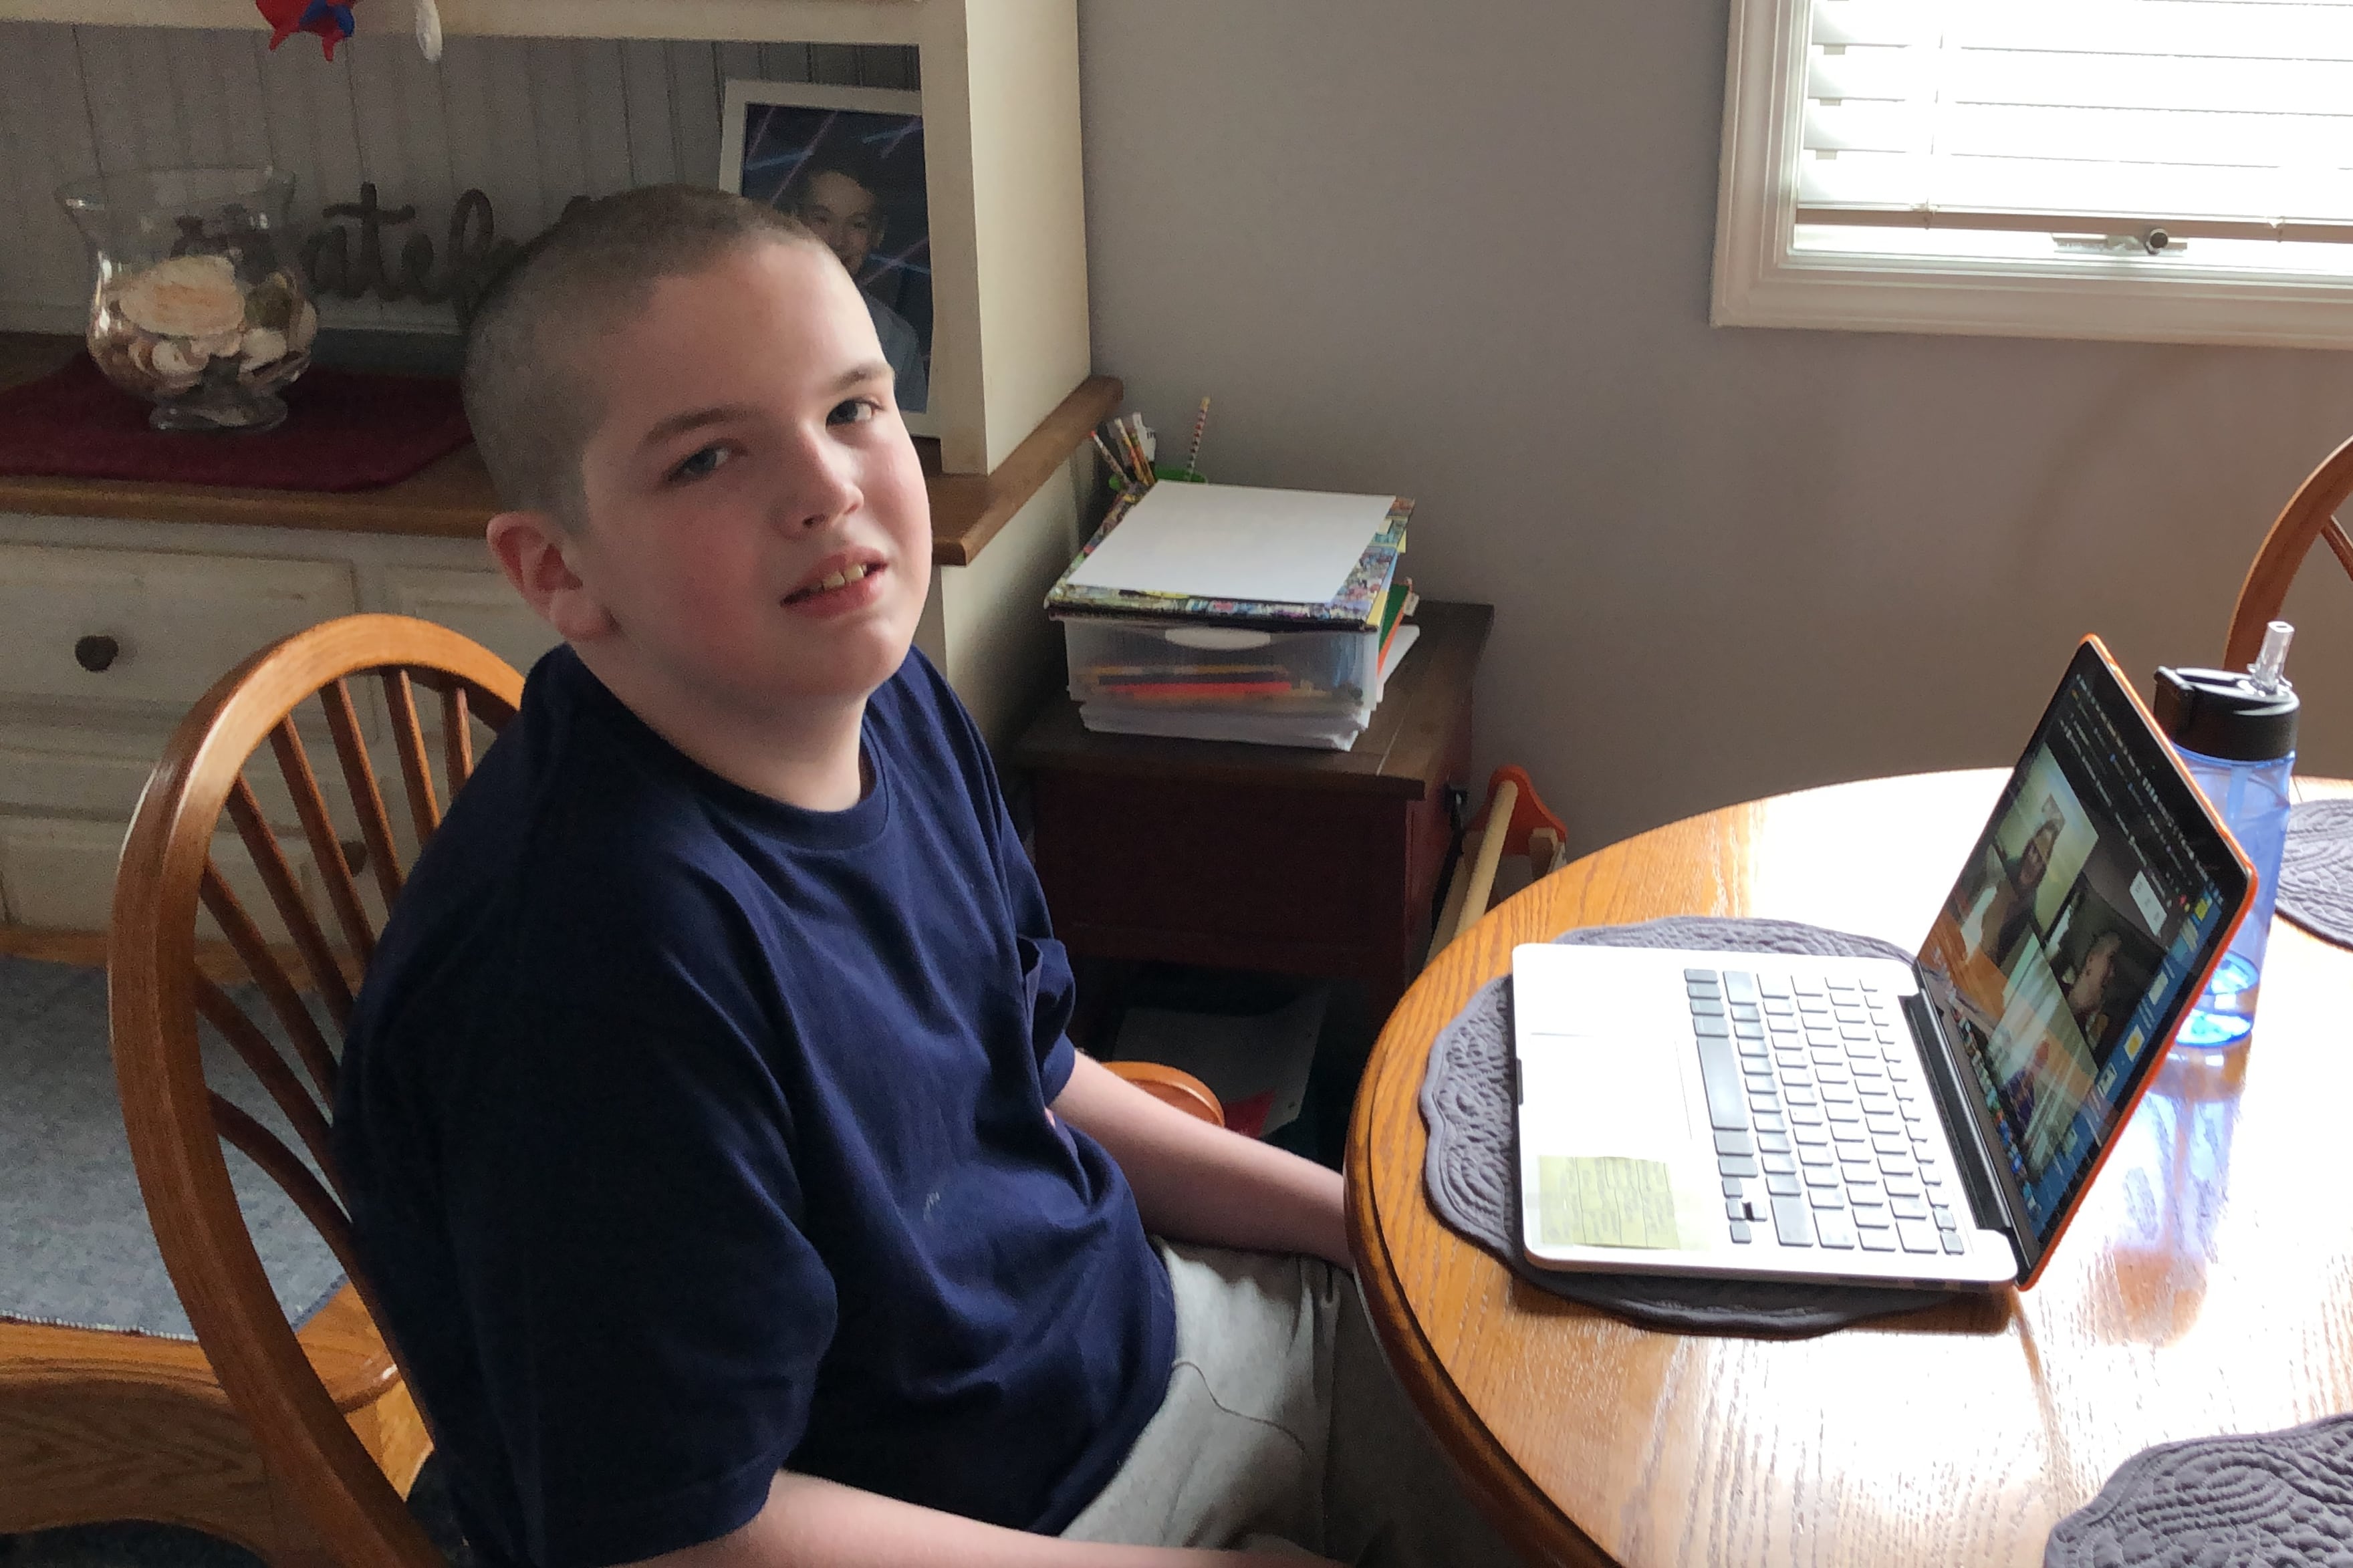 Kristen Collins’ son, Matty, sits at a kitchen table with a laptop.